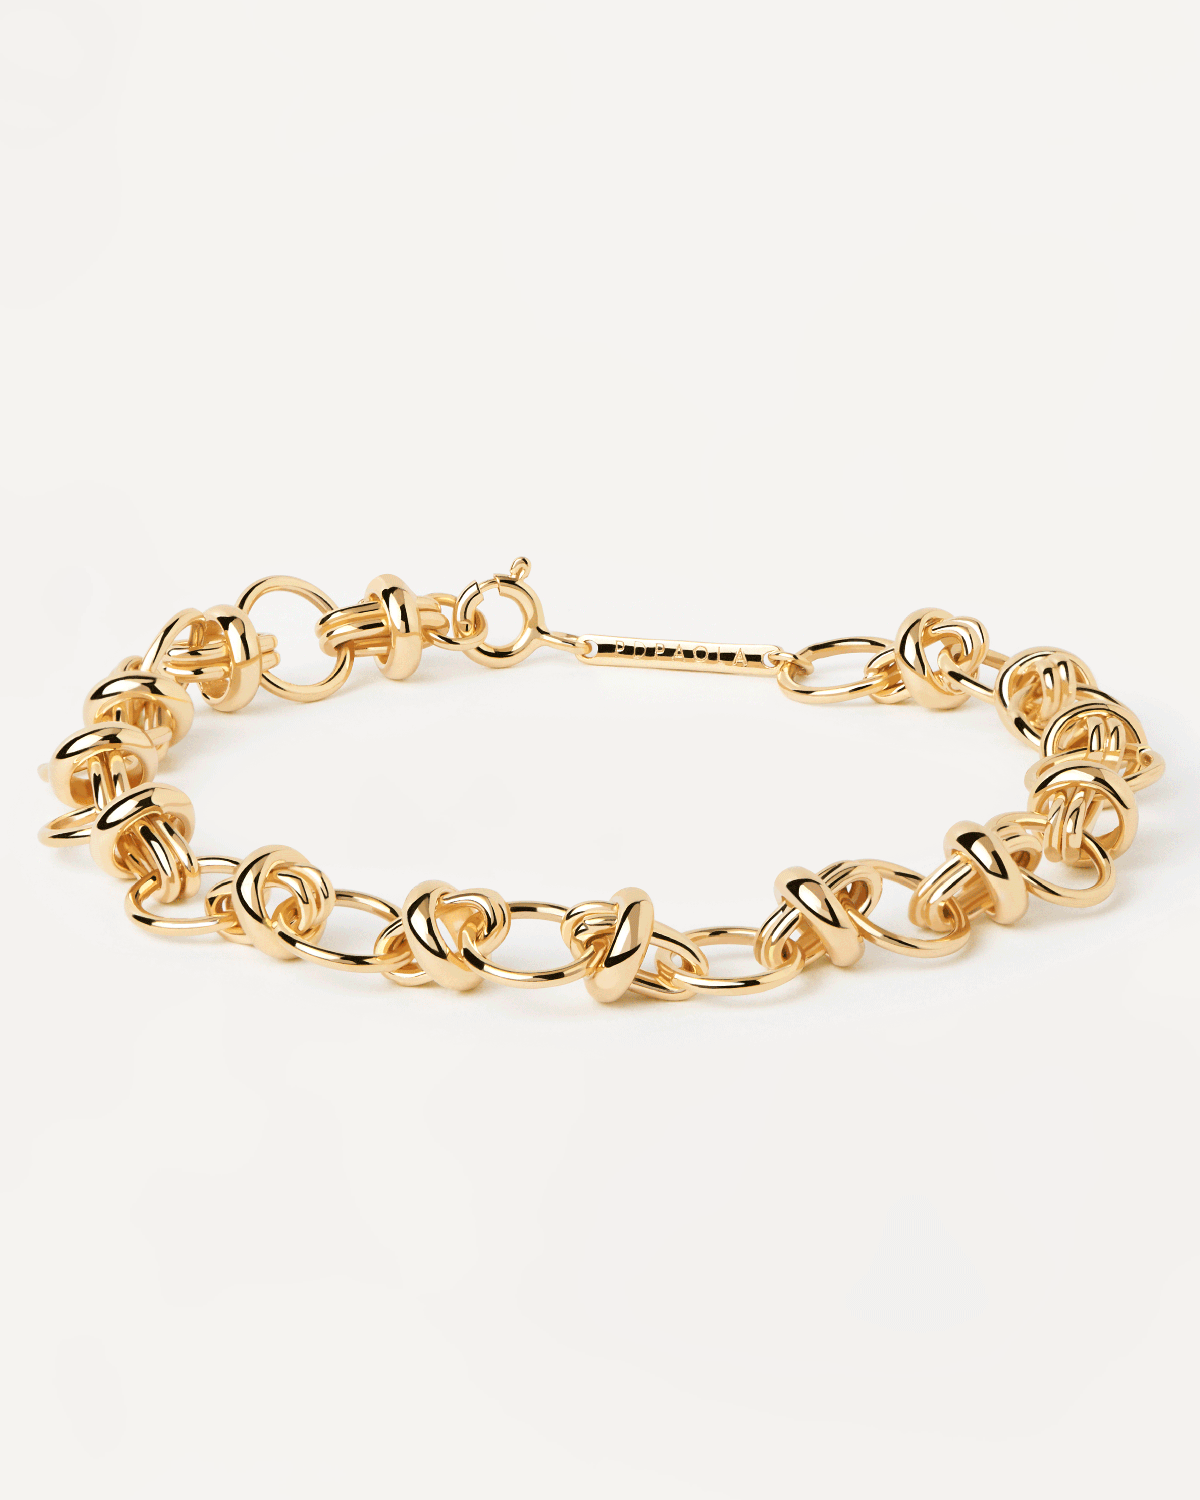 2024 Selection | Meraki Chain Bracelet. Gold-plated silver chain bracelet with round links. Get the latest arrival from PDPAOLA. Place your order safely and get this Best Seller. Free Shipping.